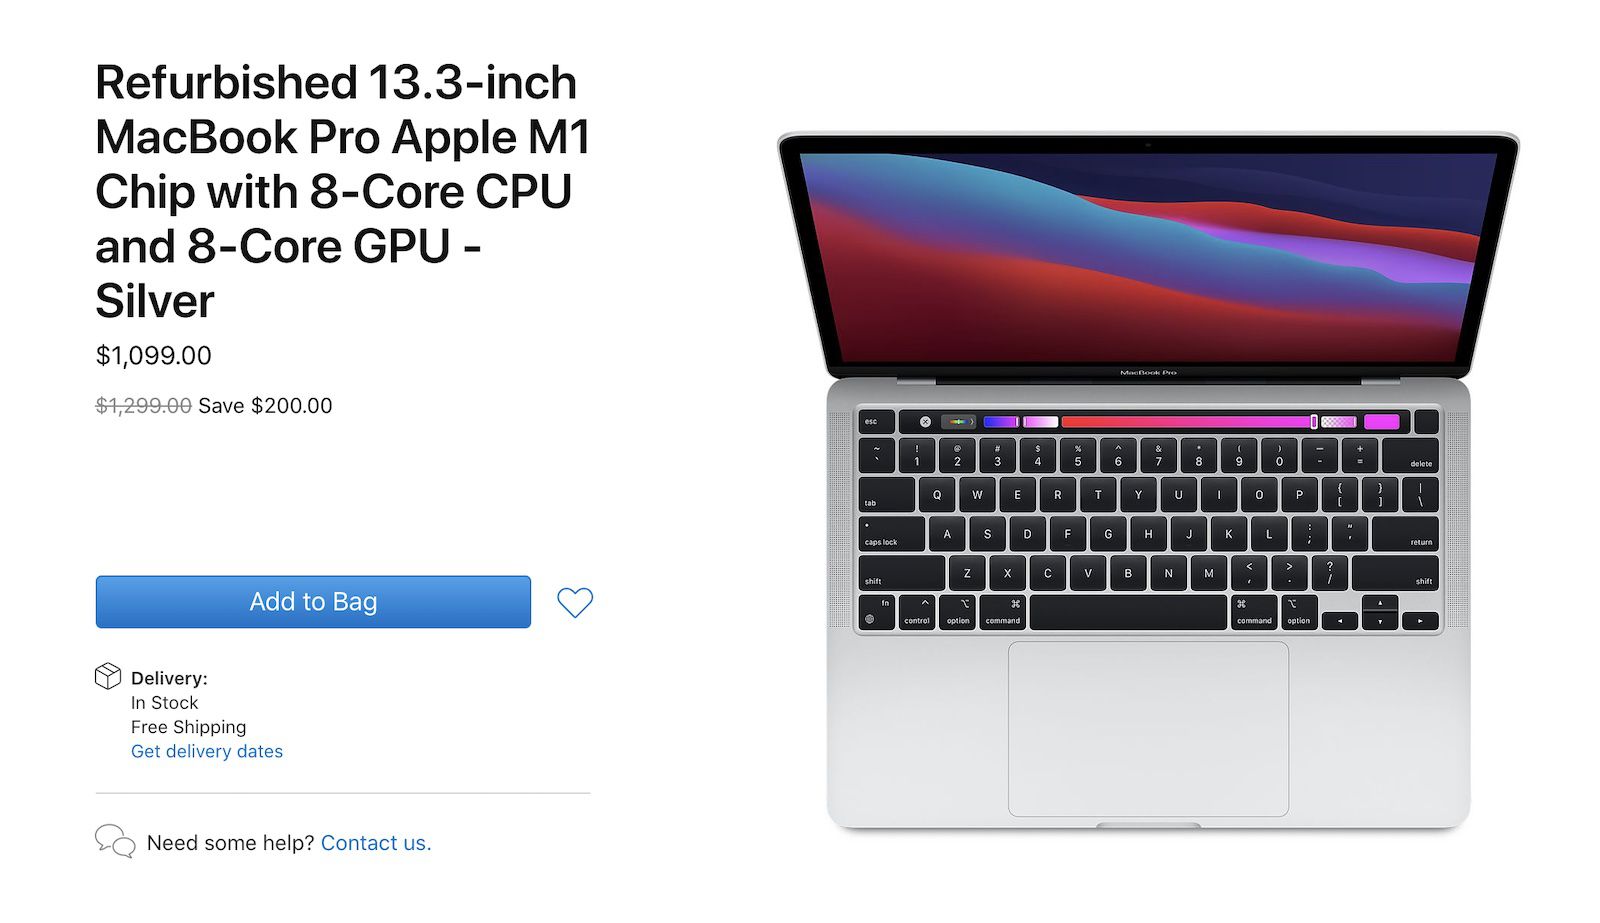 Apple Now Selling Refurbished M1 Pro and M1 Max MacBook Pro Models